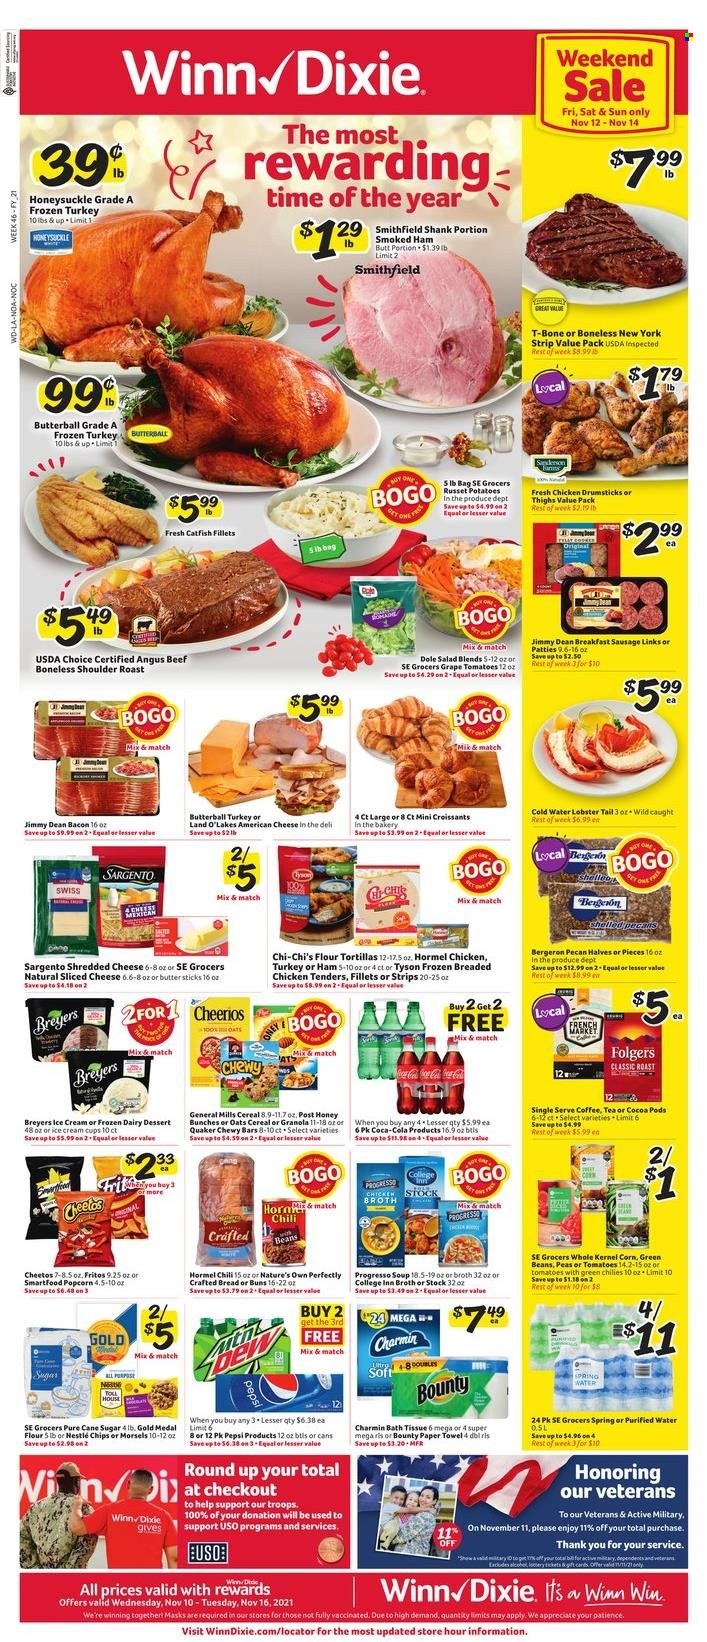 thumbnail - Winn Dixie Flyer - 11/10/2021 - 11/16/2021 - Sales products - bread, tortillas, buns, flour tortillas, corn, russet potatoes, tomatoes, potatoes, peas, salad, Dole, catfish, lobster, lobster tail, fried chicken, Quaker, Progresso, Jimmy Dean, Hormel, bacon, Butterball, smoked ham, sausage, american cheese, shredded cheese, sliced cheese, Sargento, ice cream, strips, Nestlé, Bounty, Fritos, Cheetos, Smartfood, popcorn, cane sugar, broth, cereals, granola, Cheerios, Coca-Cola, Pepsi, spring water, purified water, coffee, Folgers, whole turkey, chicken drumsticks, beef meat, t-bone steak, bath tissue, paper towels, Charmin, cup, Nature's Own. Page 1.